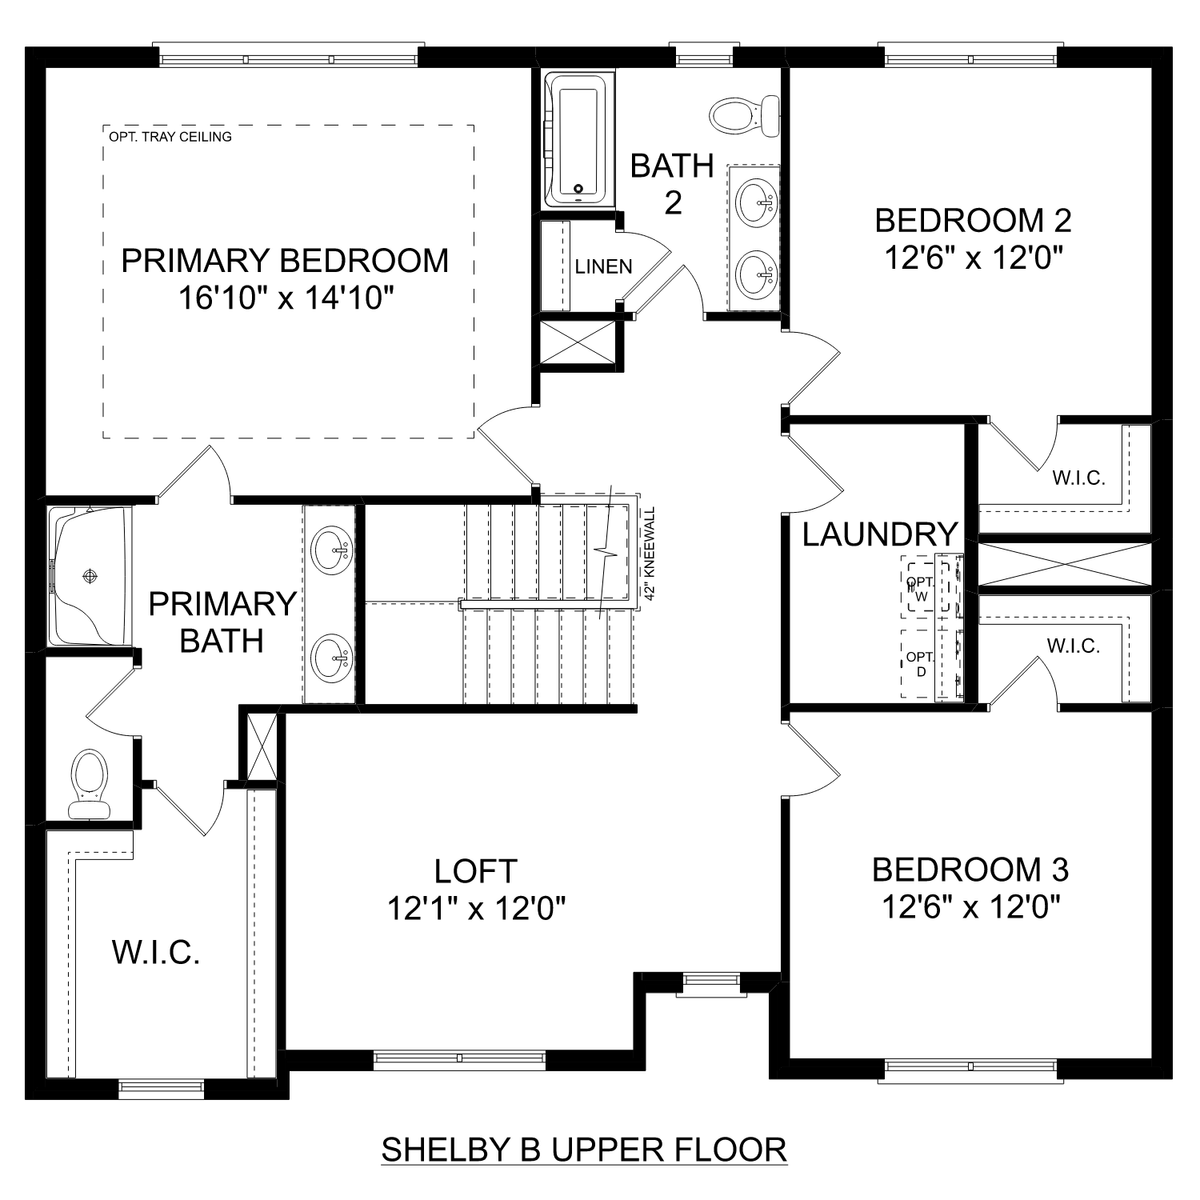 2 - The Shelby B floor plan layout for 114 Bella May Lane in Davidson Homes' Heritage Lakes community.